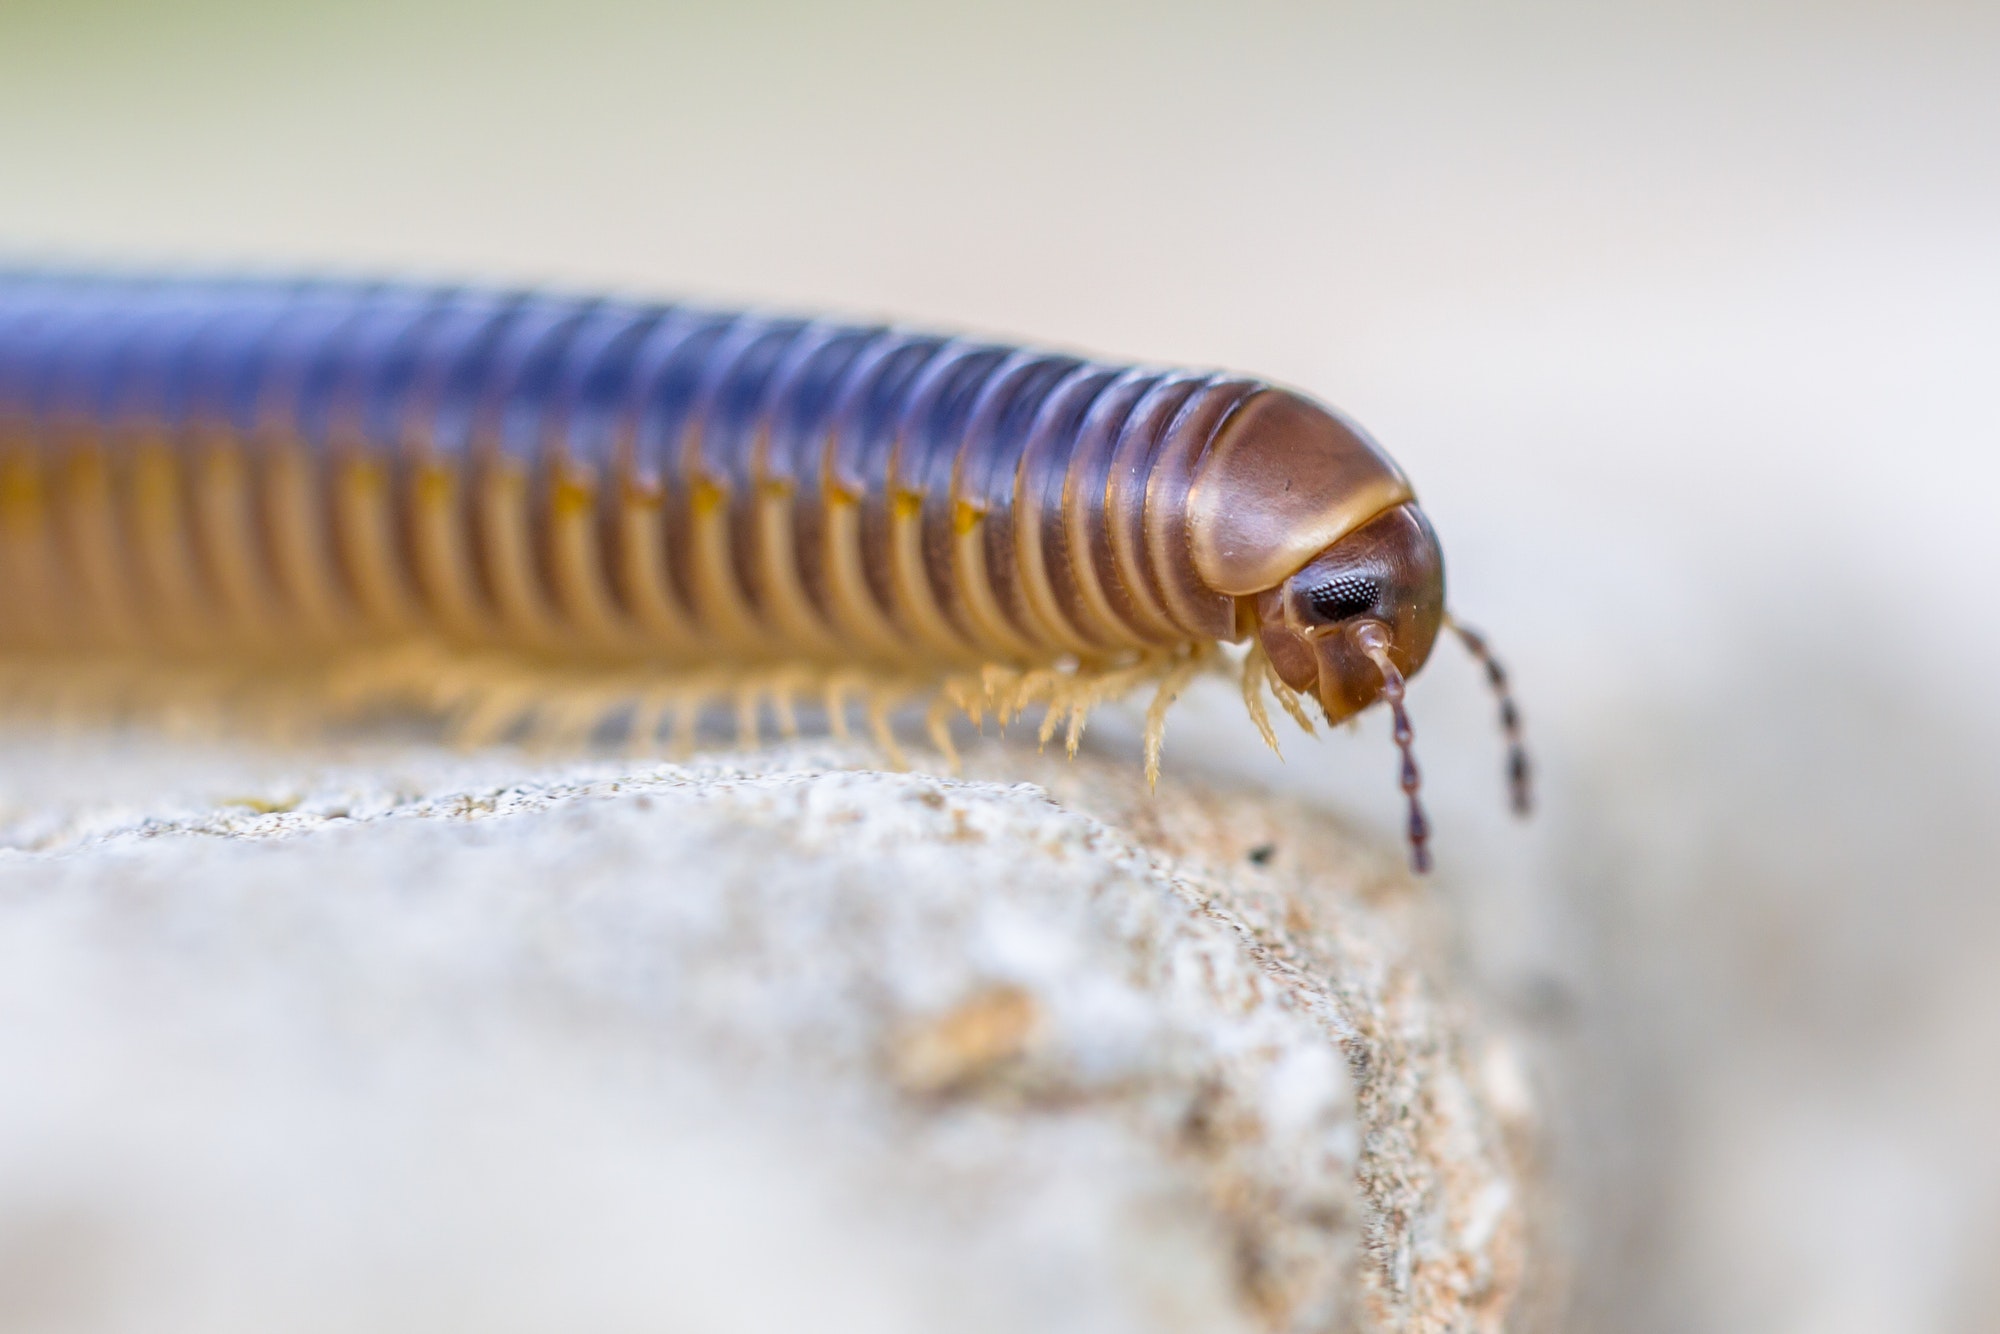 Are millipedes poisonous? — Molly’s student essay